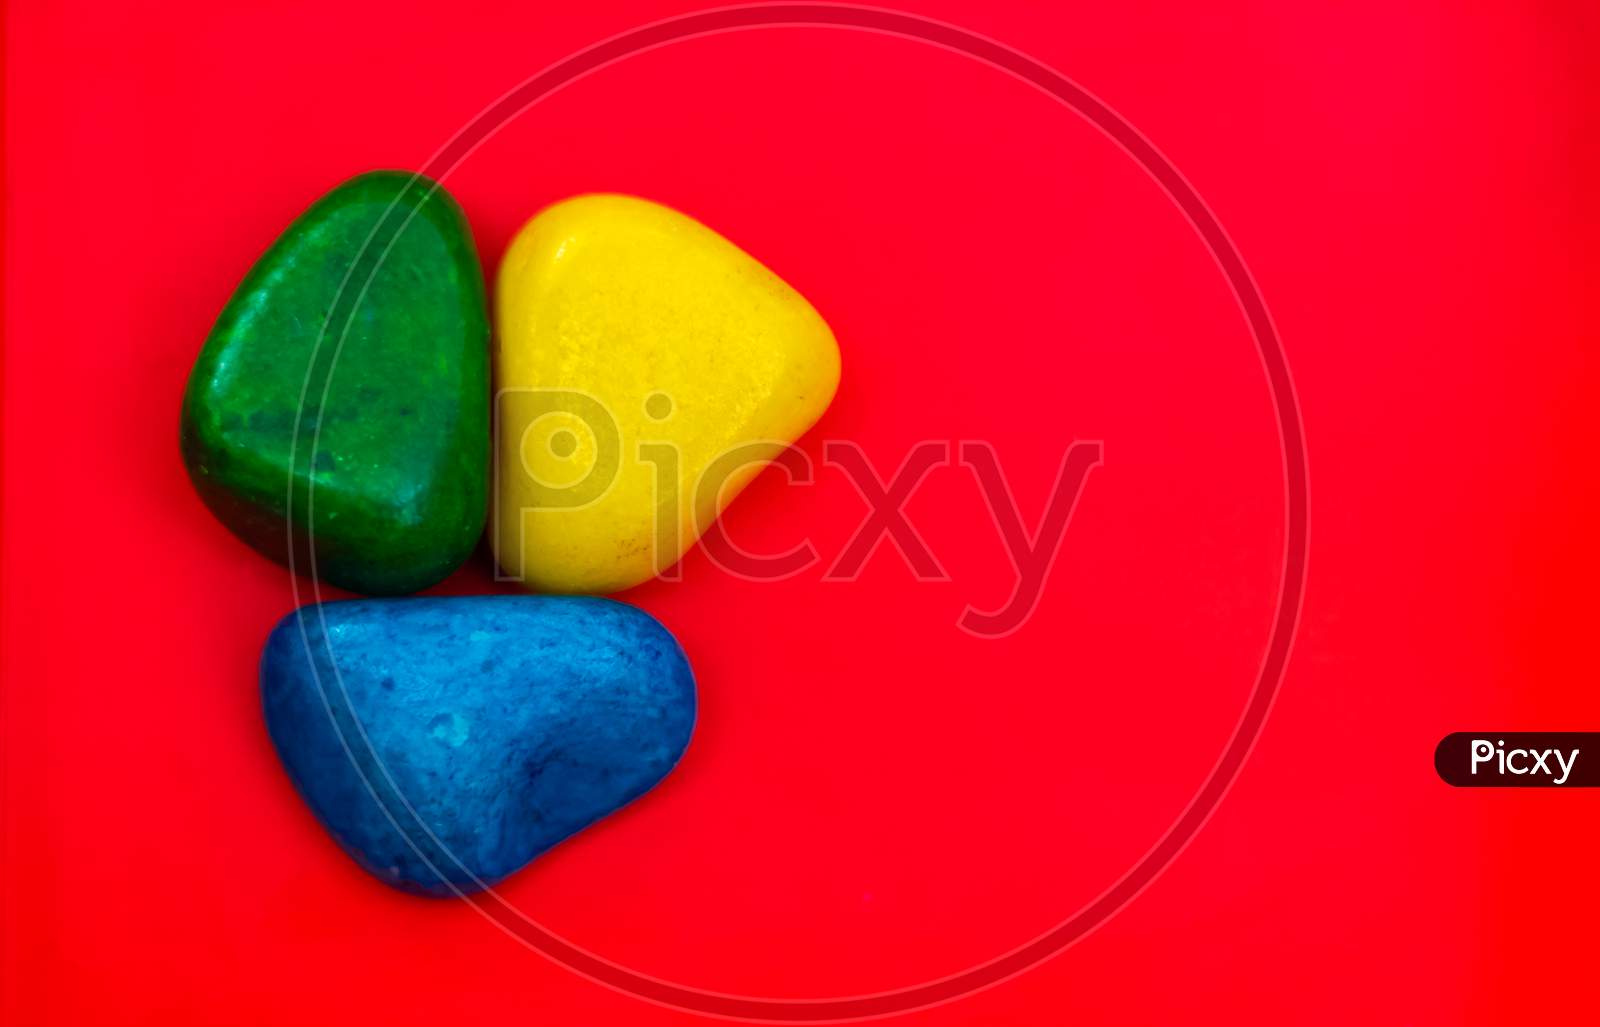 Multi Color Natural Pebbles Green, Blue And Yellow Stone Isolated On Red Background With Space For Copy Text And Words. Colorful Natural Pebbles Stone Isolated. Colorful Sea Stones. Rgb Color Stones.